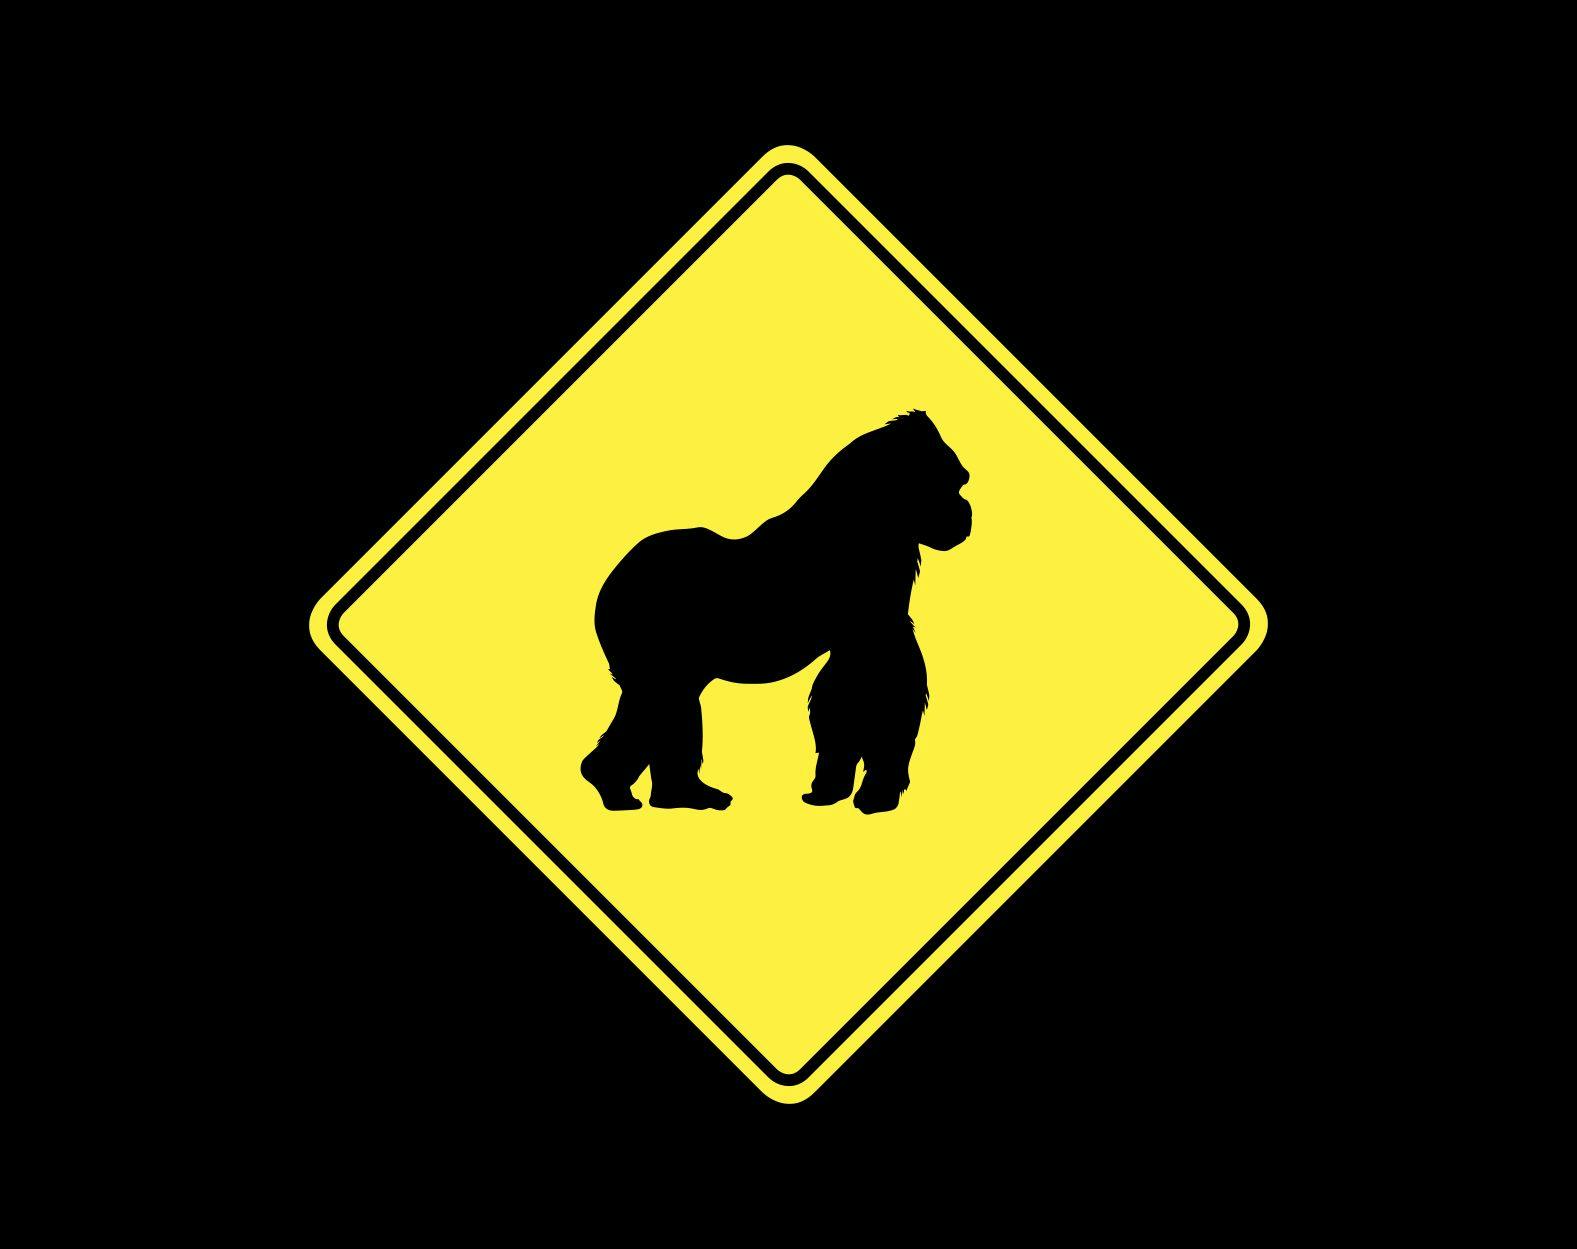 Yellow warning traffic sign with silhouette of a Gorilla